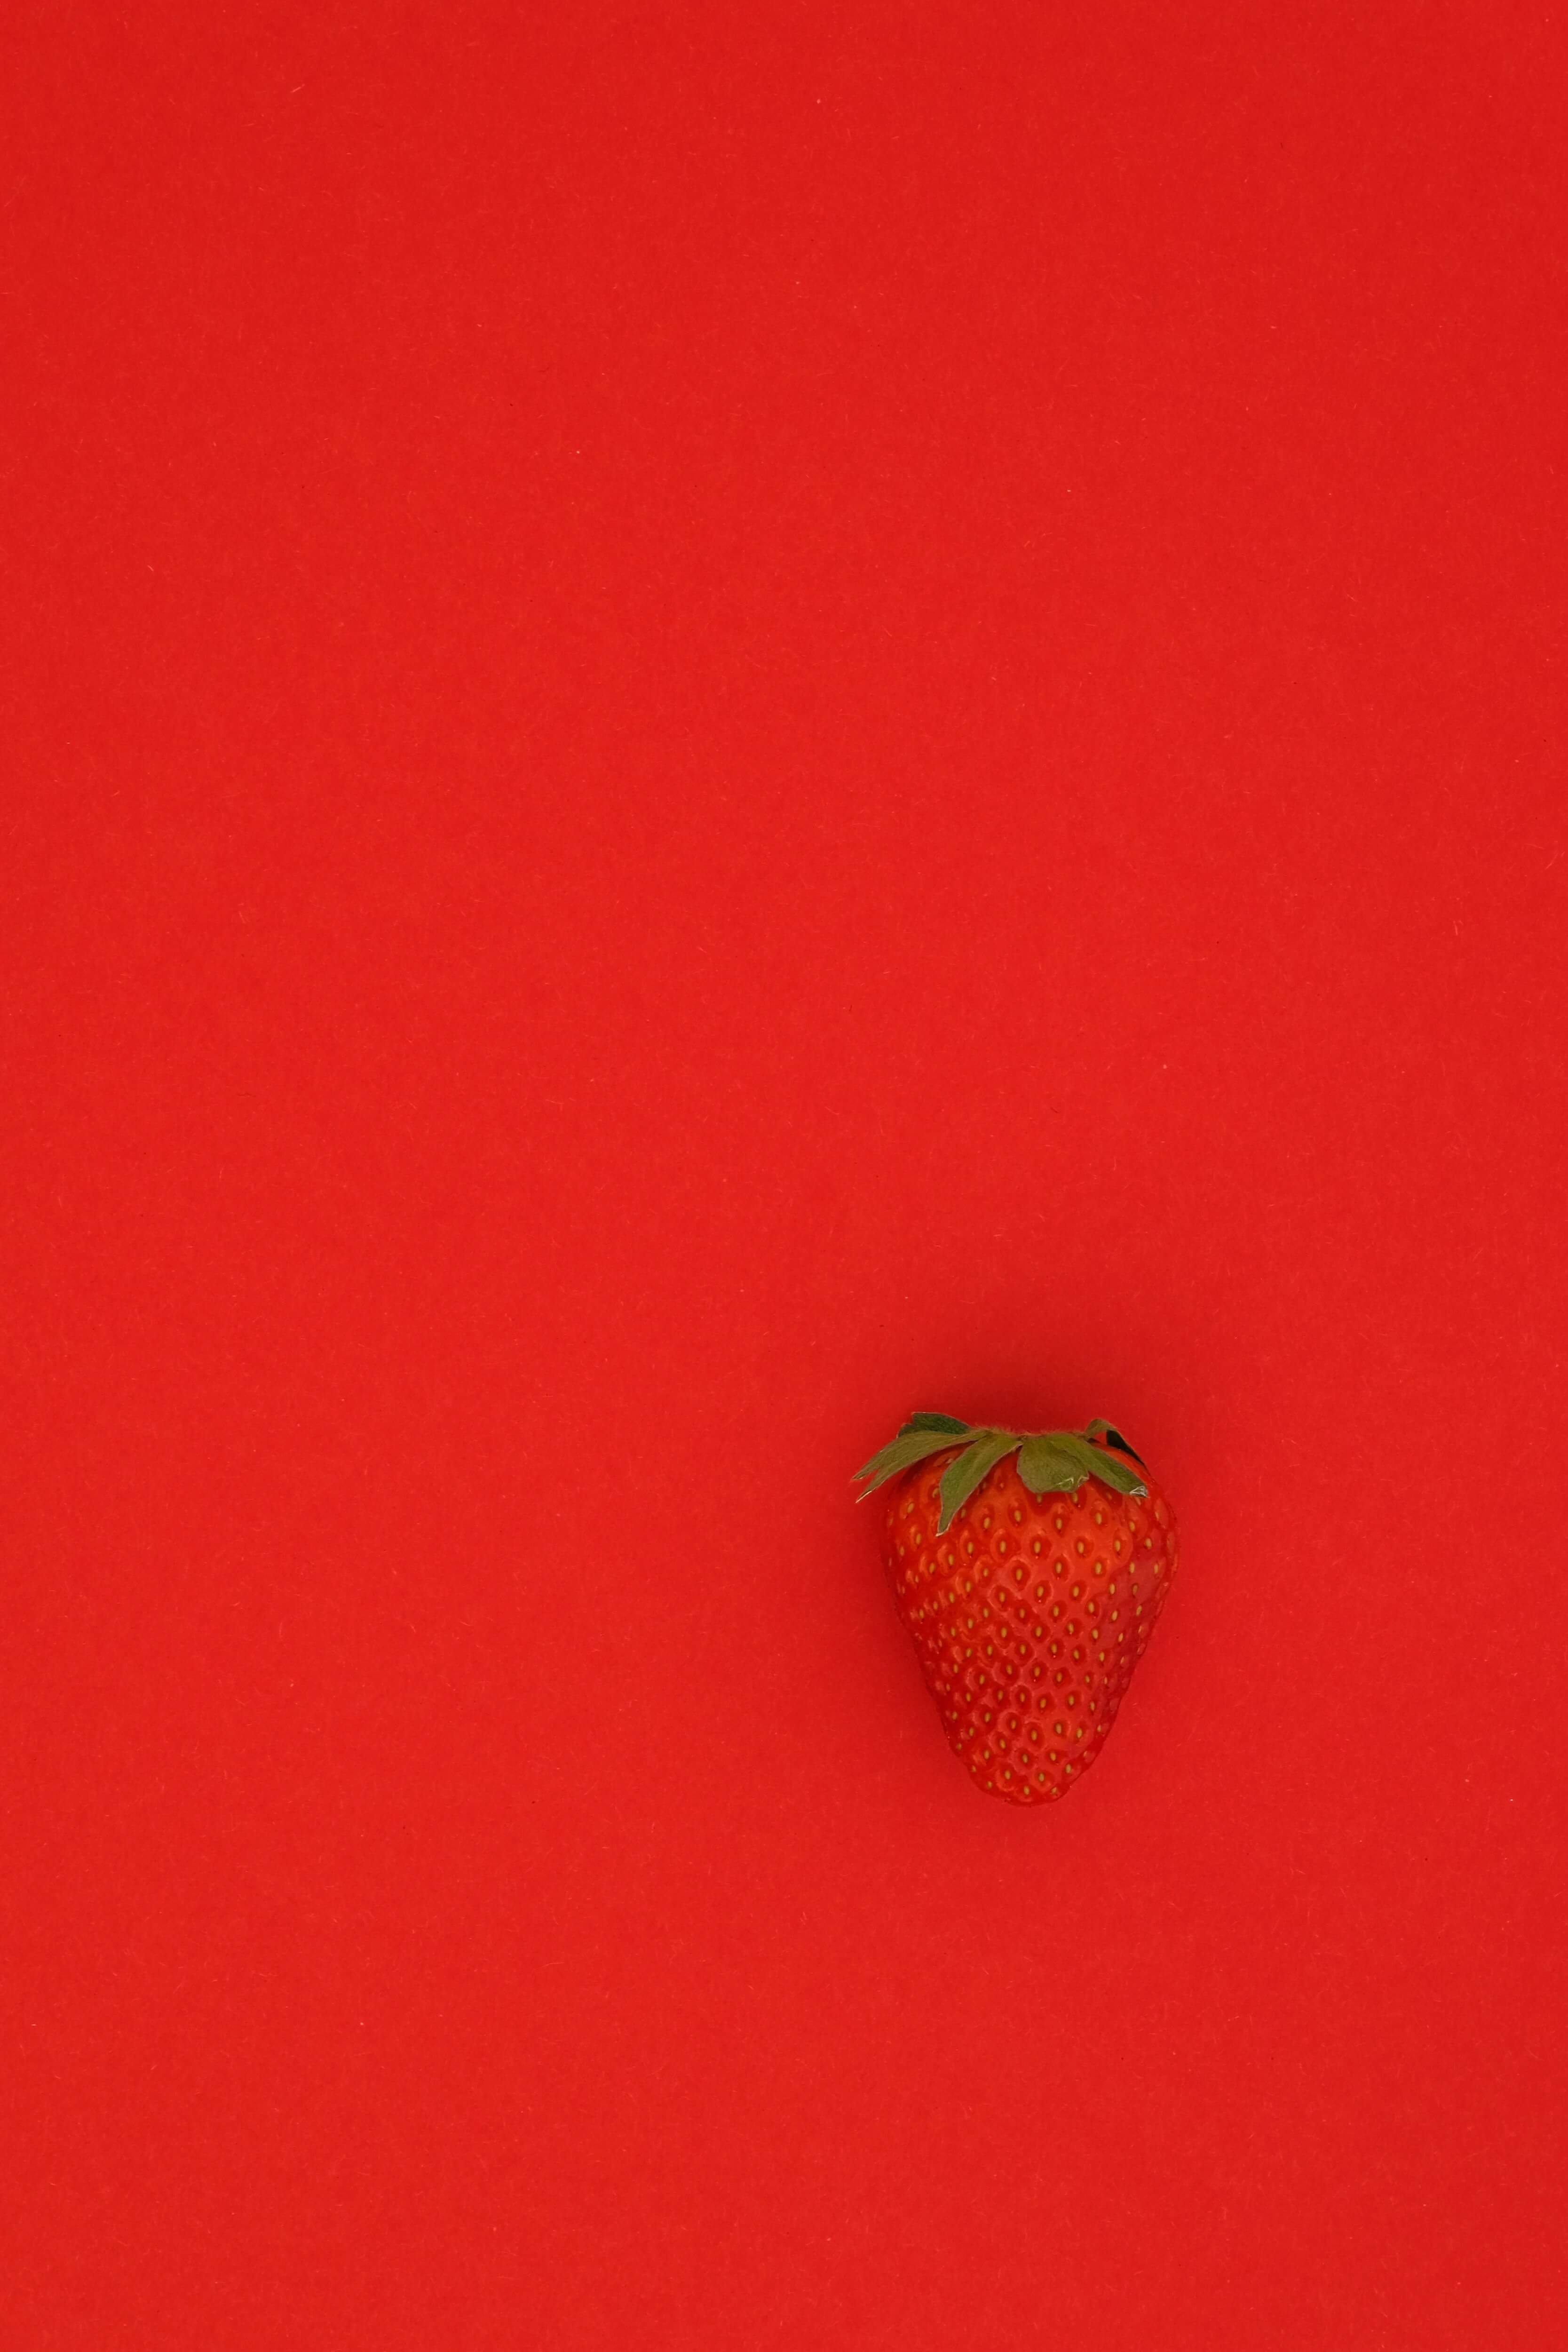 A strawberry on a red background.